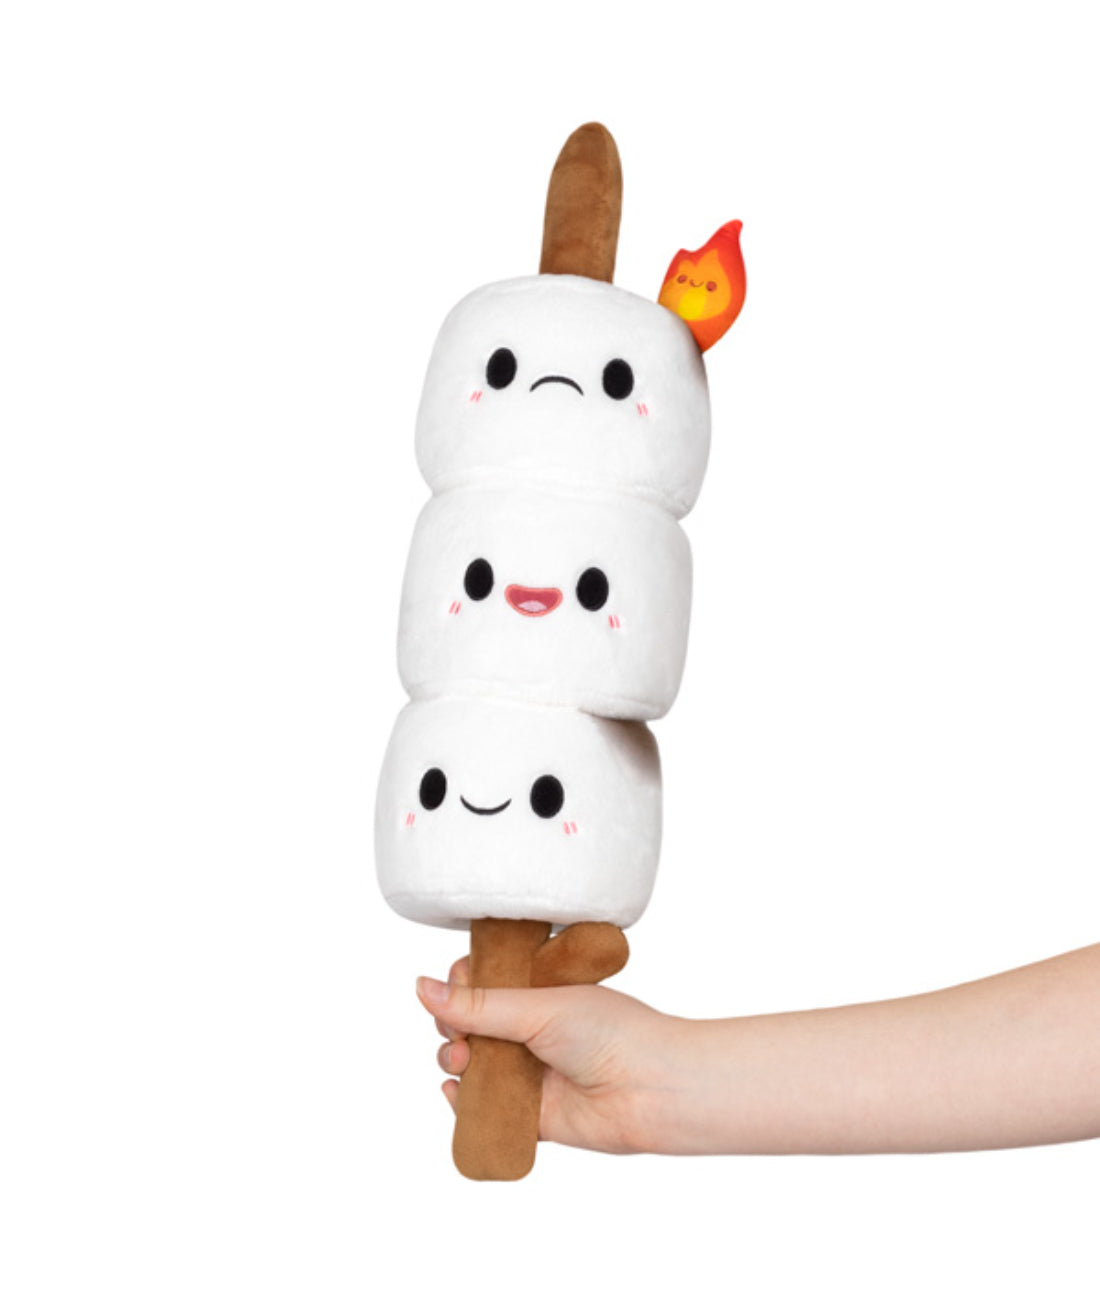 Squishable Comfort Food Marshmallows S'more Stick